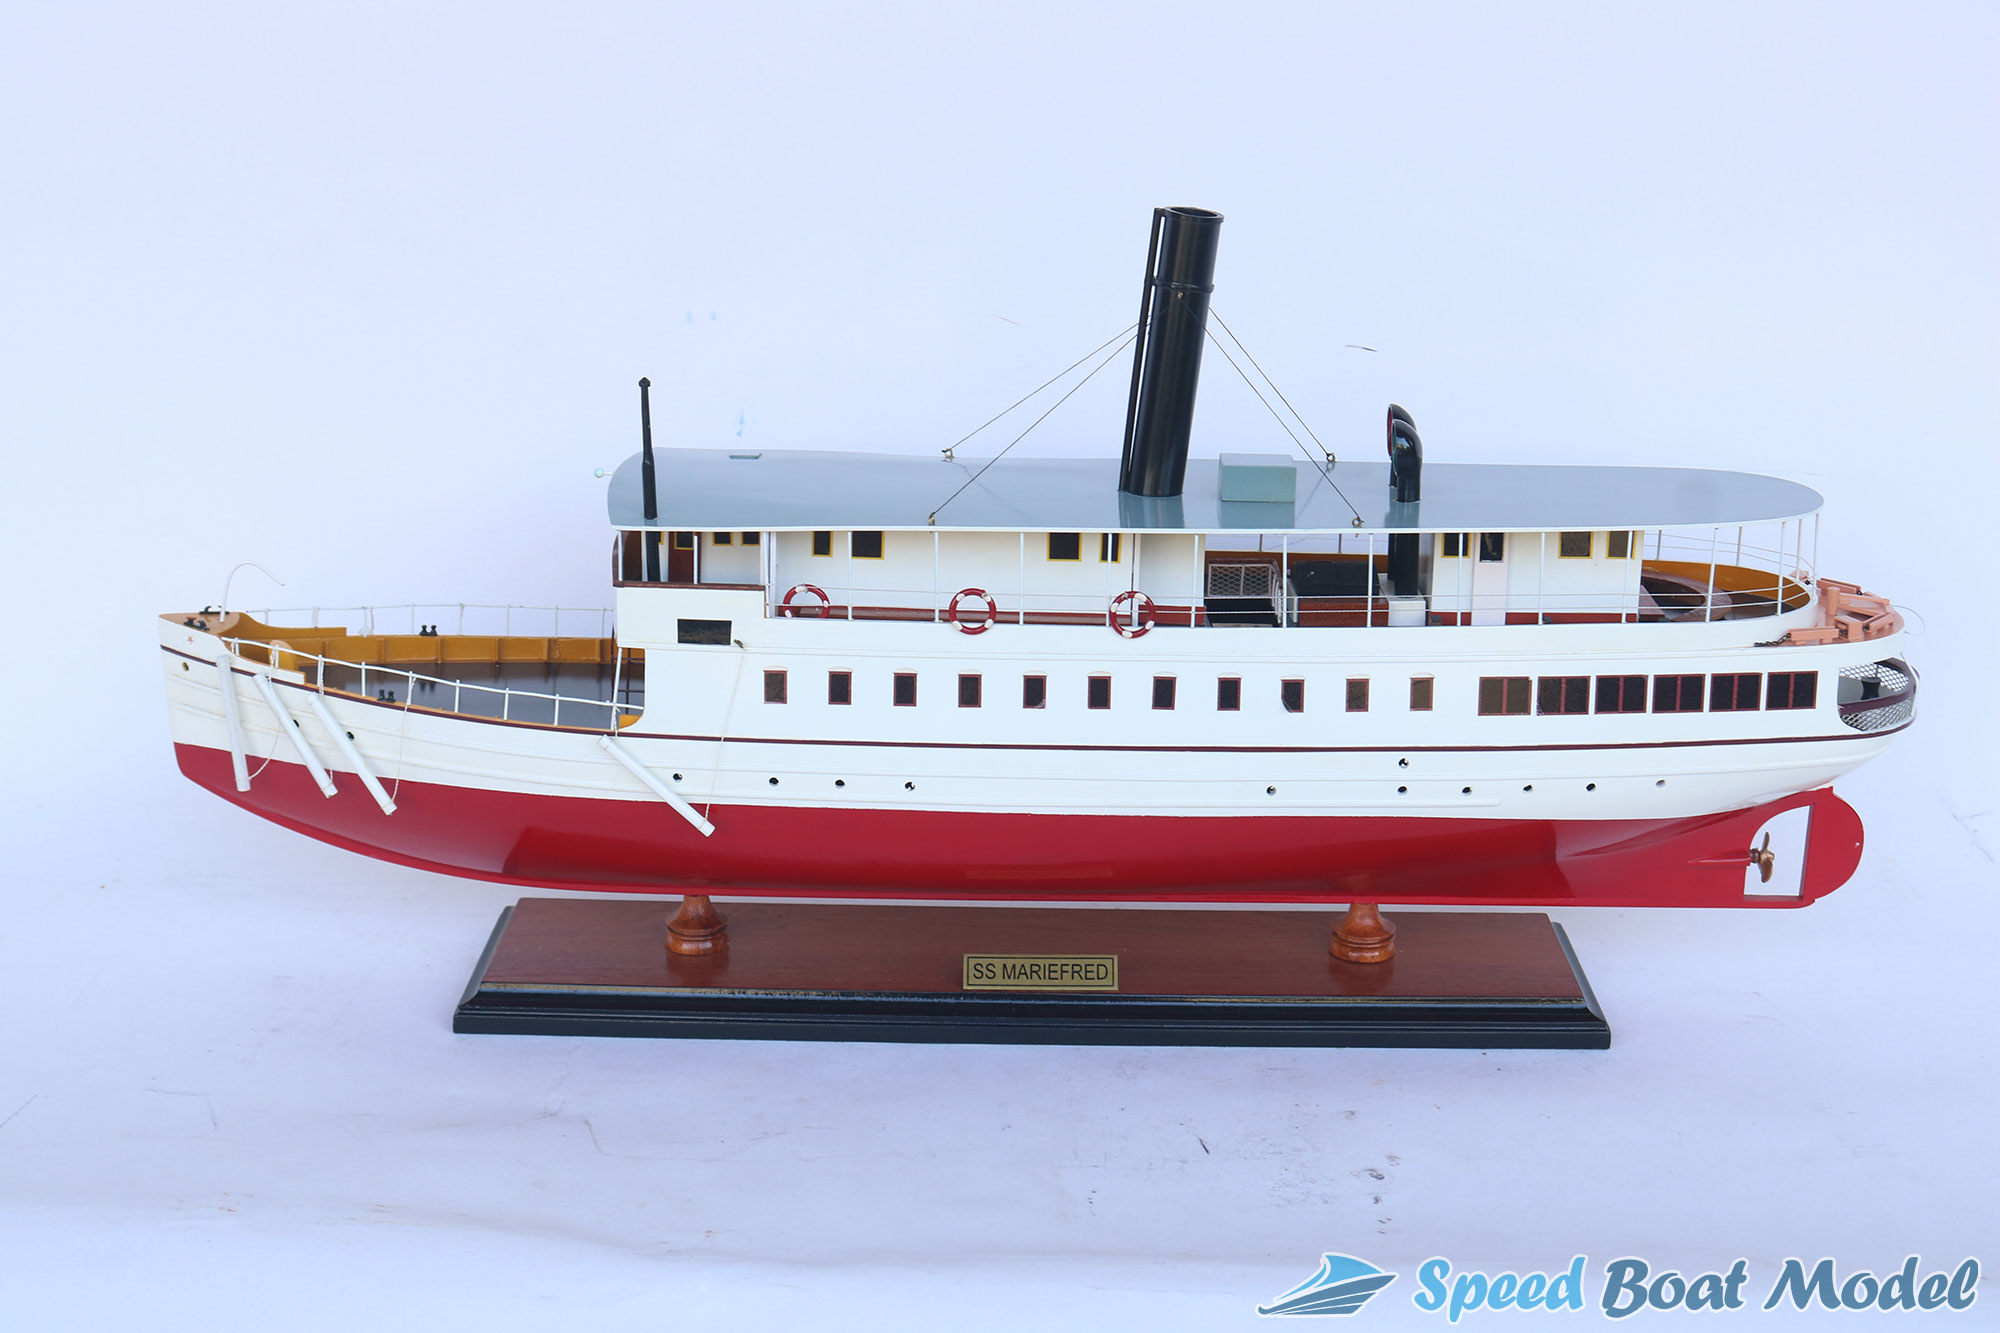 Mariefred Steam Cruise Liner Model 27.5"